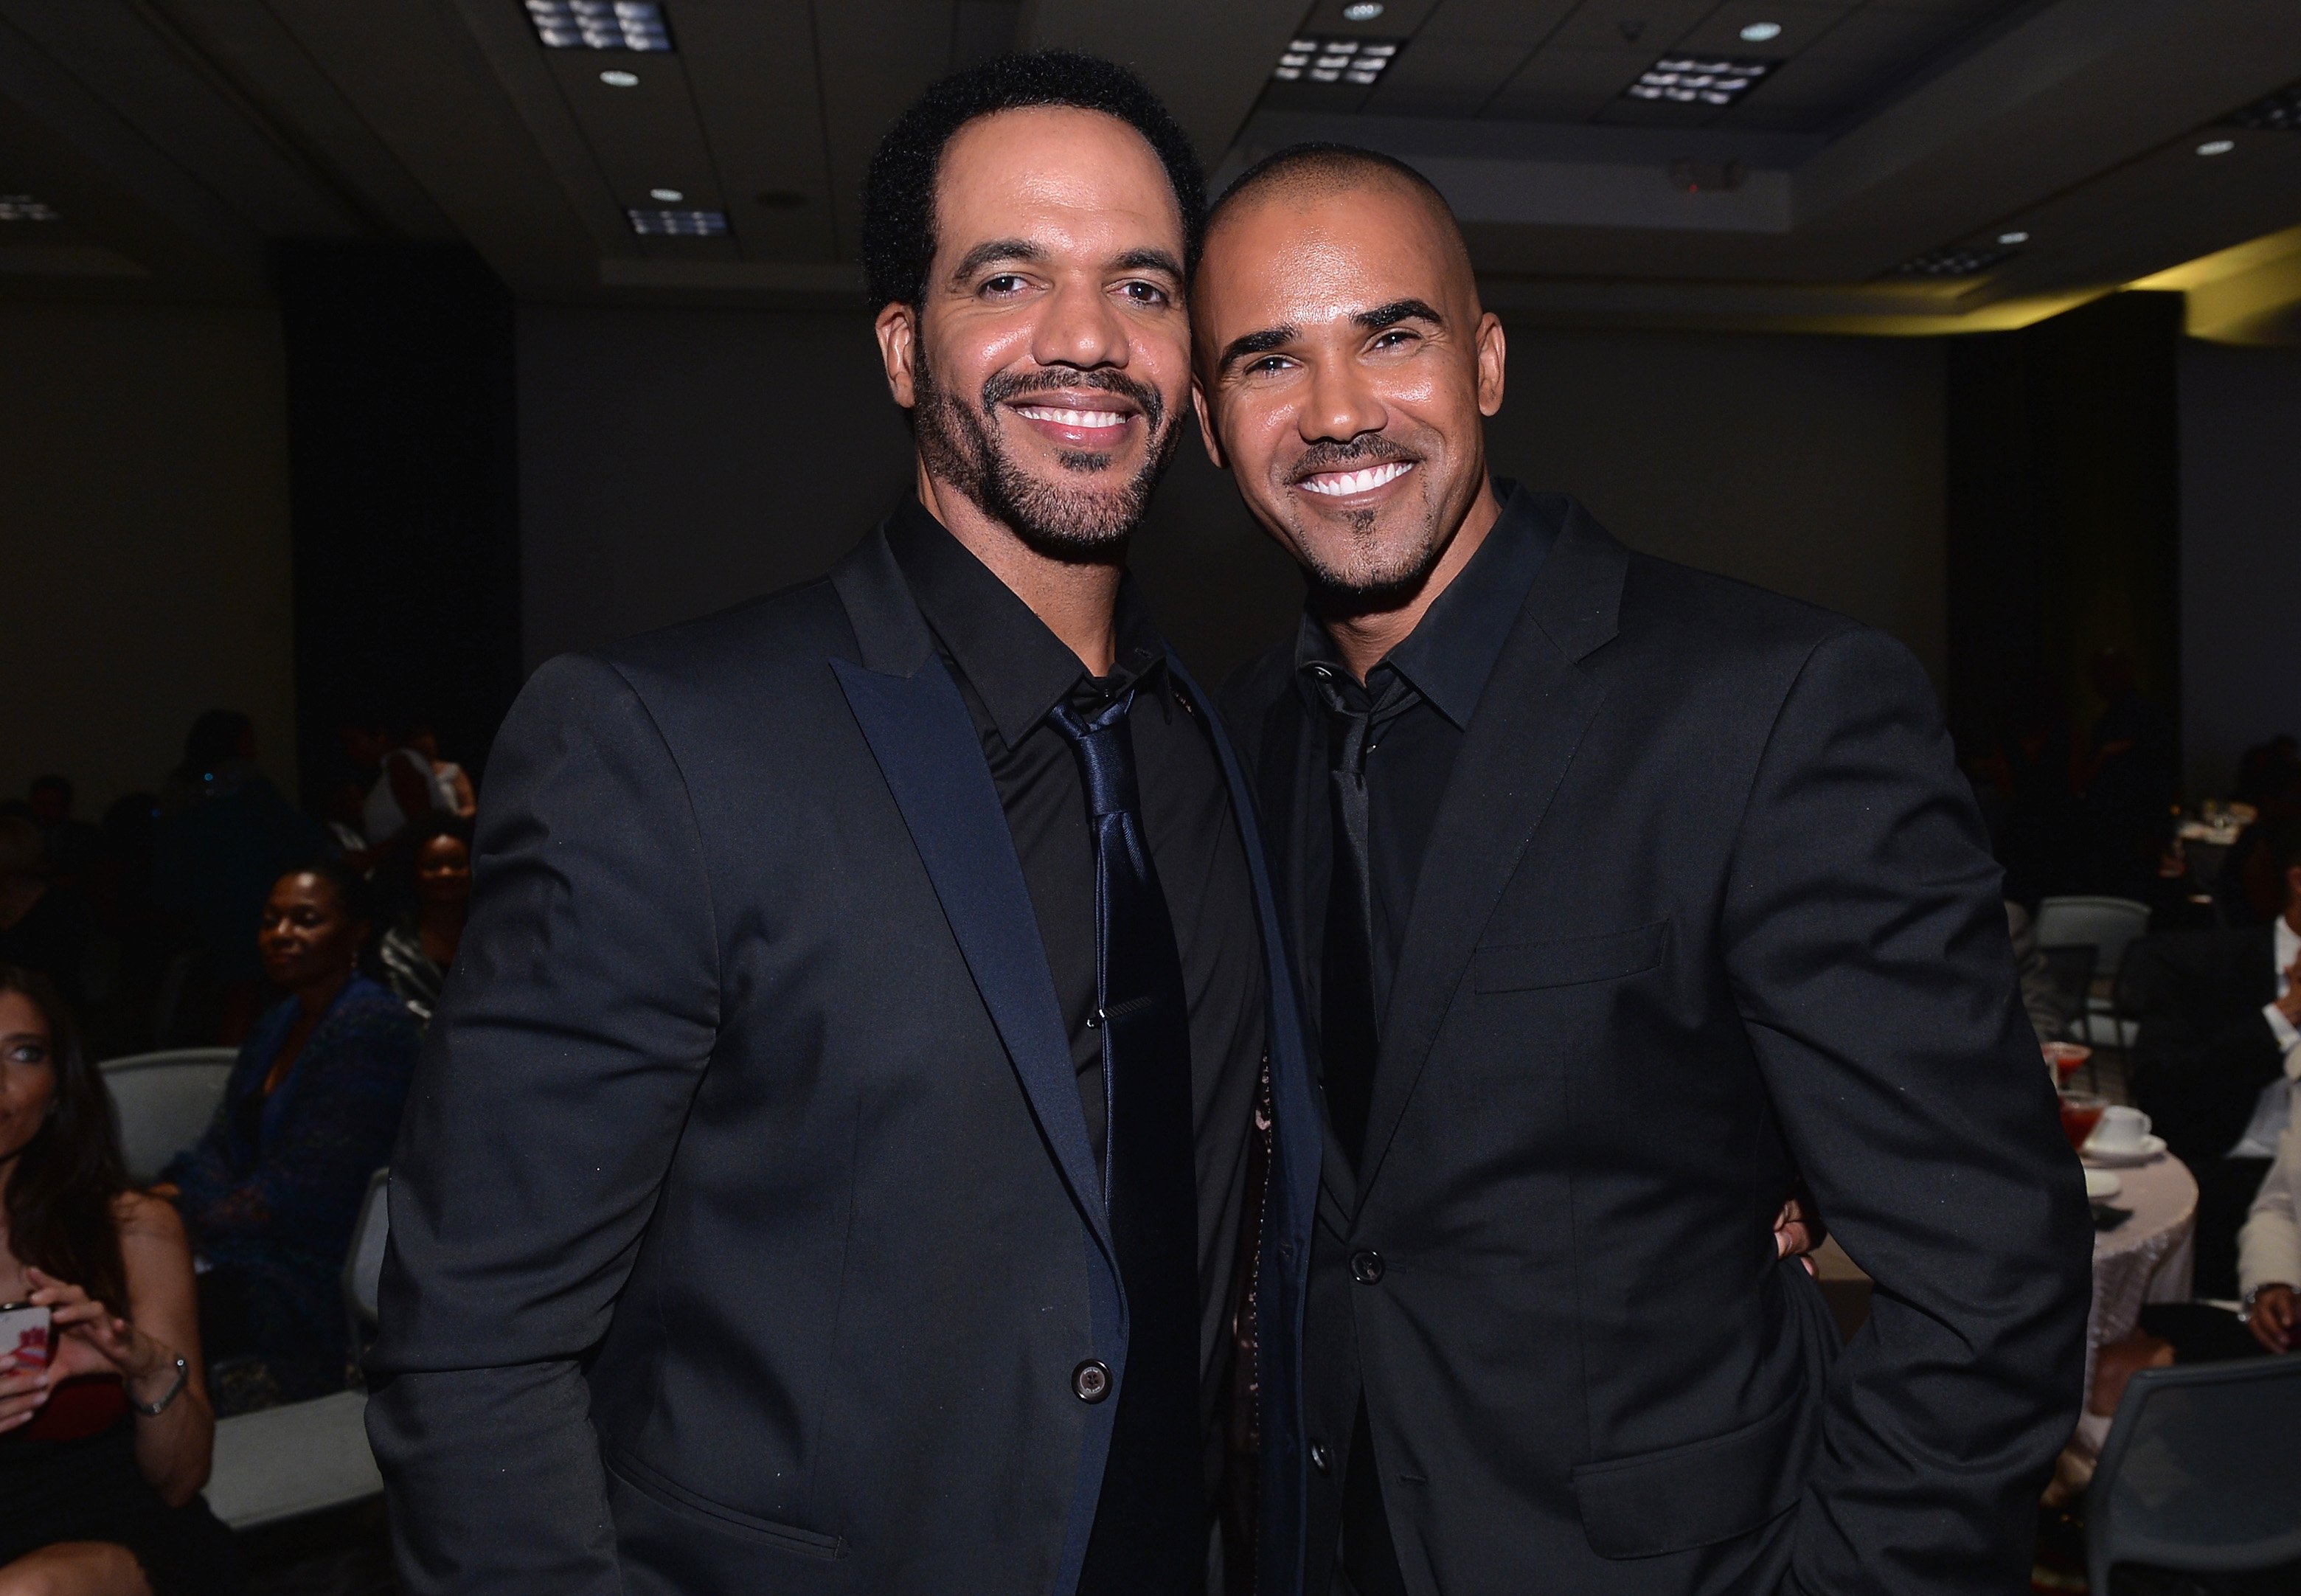 Kristoff St. John and Shemar Moore at the 45th NAACP Image Awards Non-Televised Awards Ceremony | Photo: Getty Images